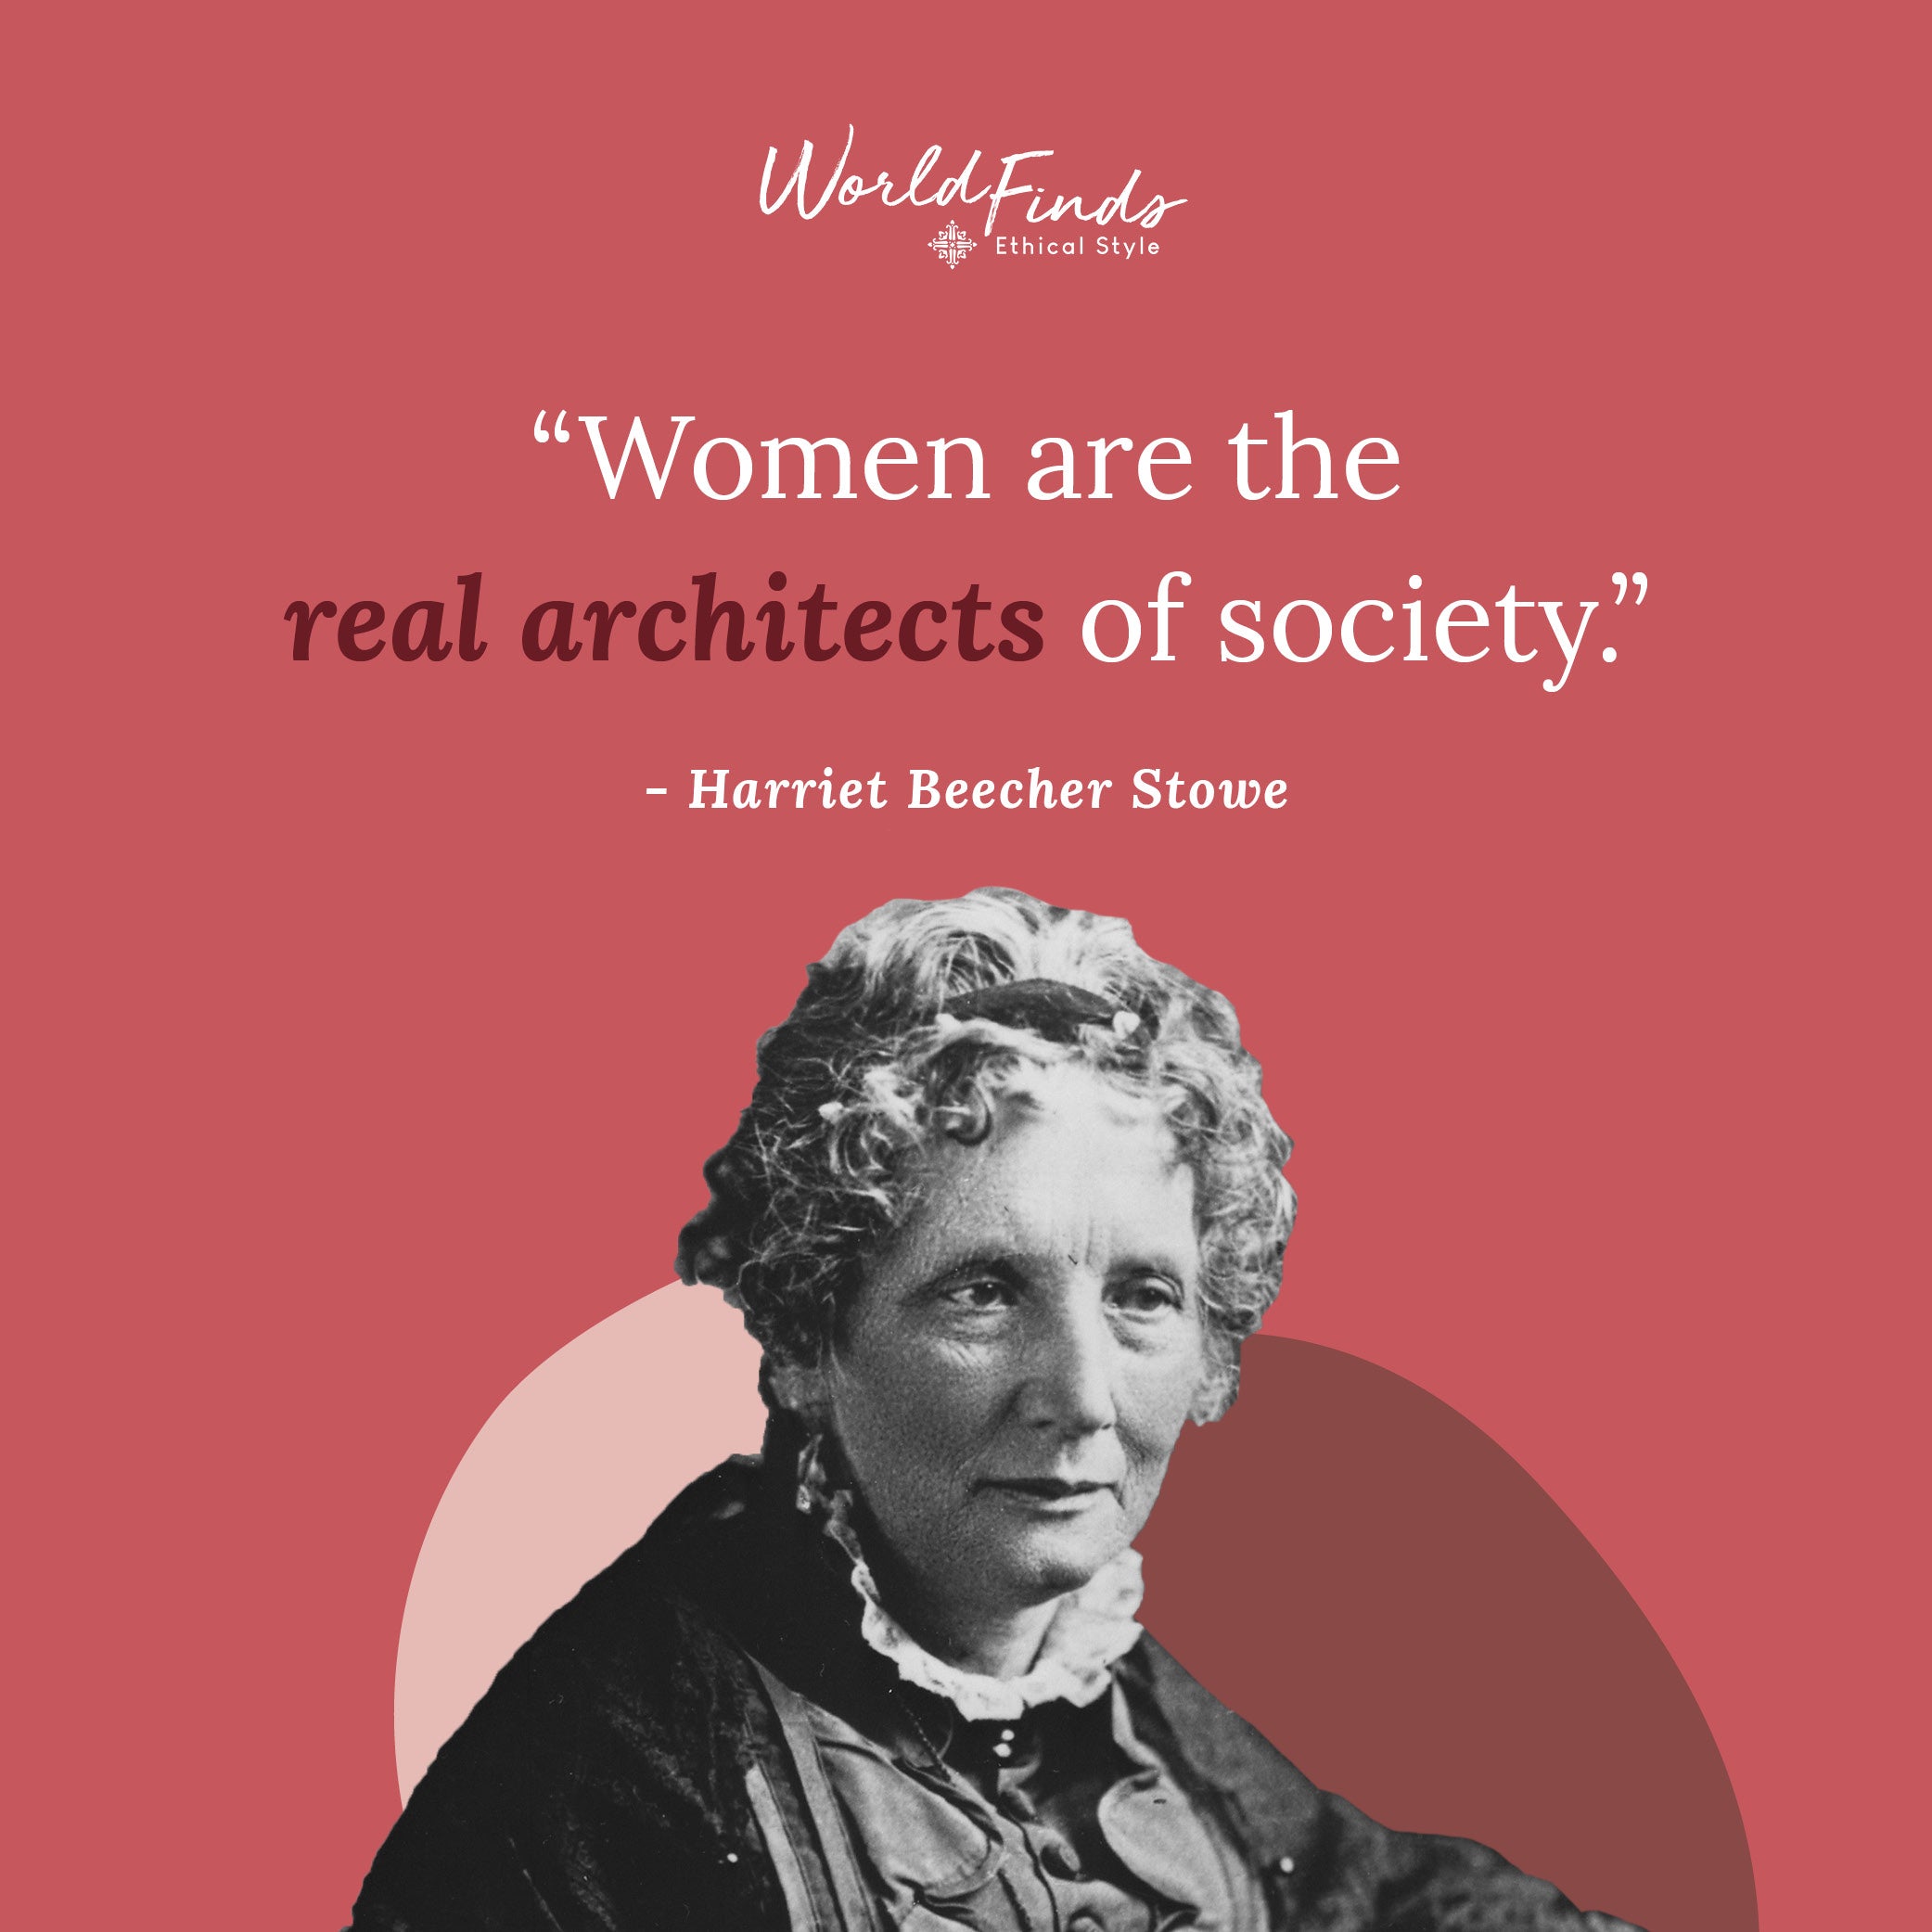 Quote from Harriet Beecher Stowe, "Women are the reach architects of society"